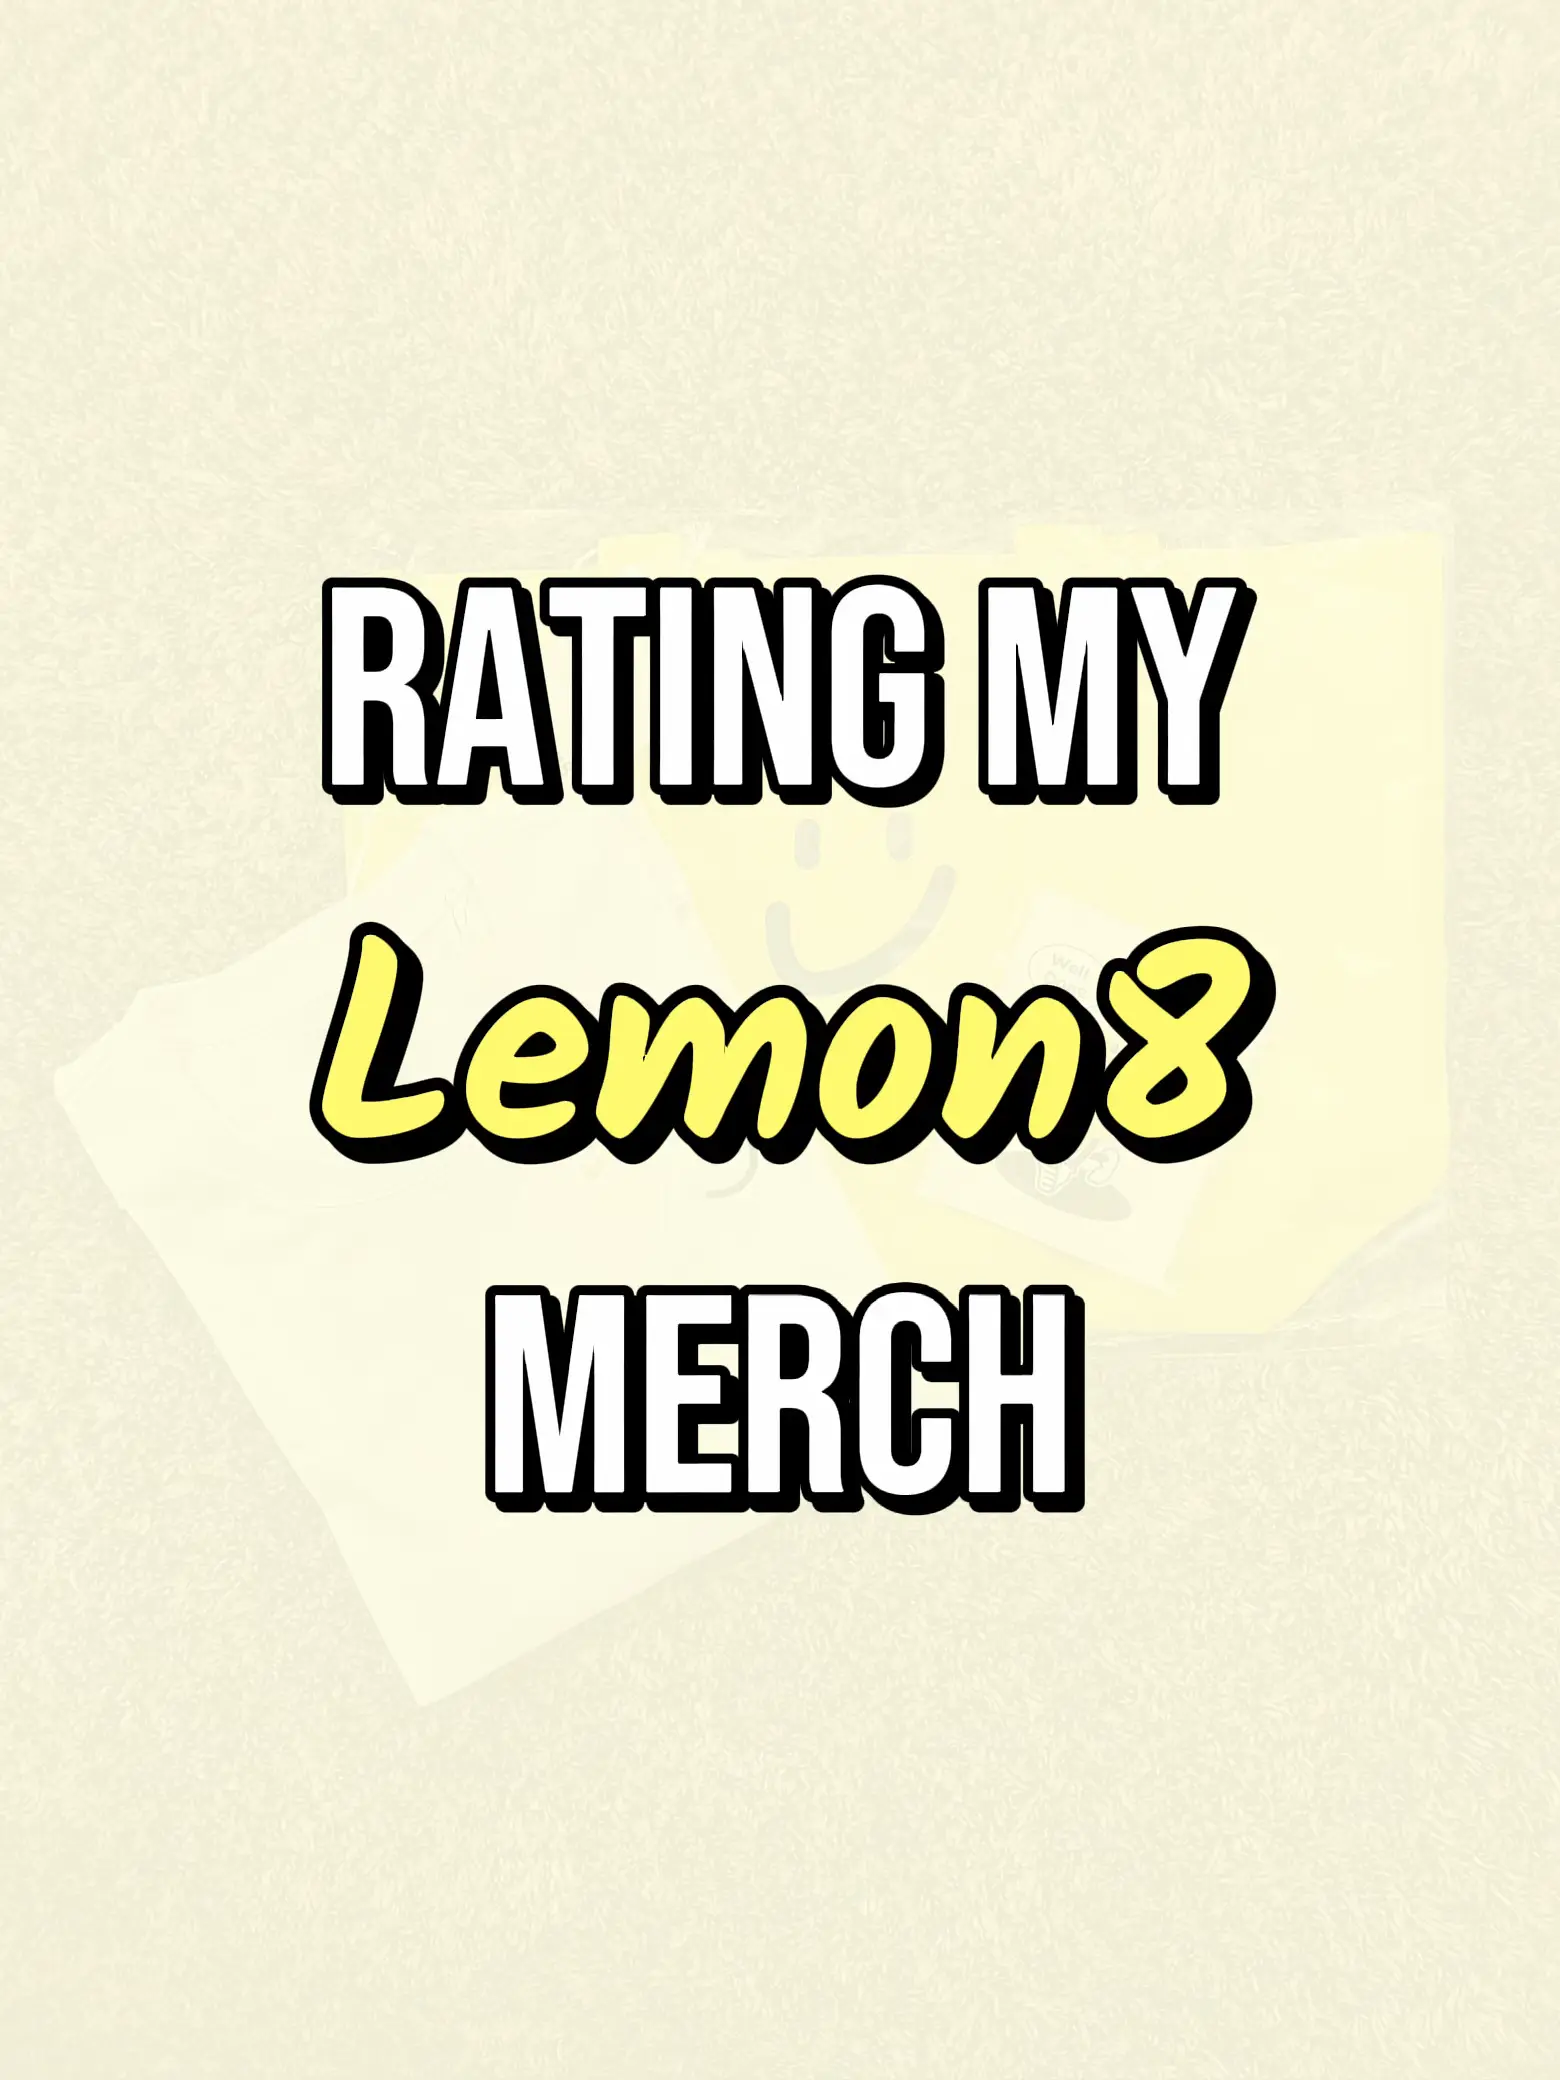  A sign that says "RATING MY Lemon8 MERCH".